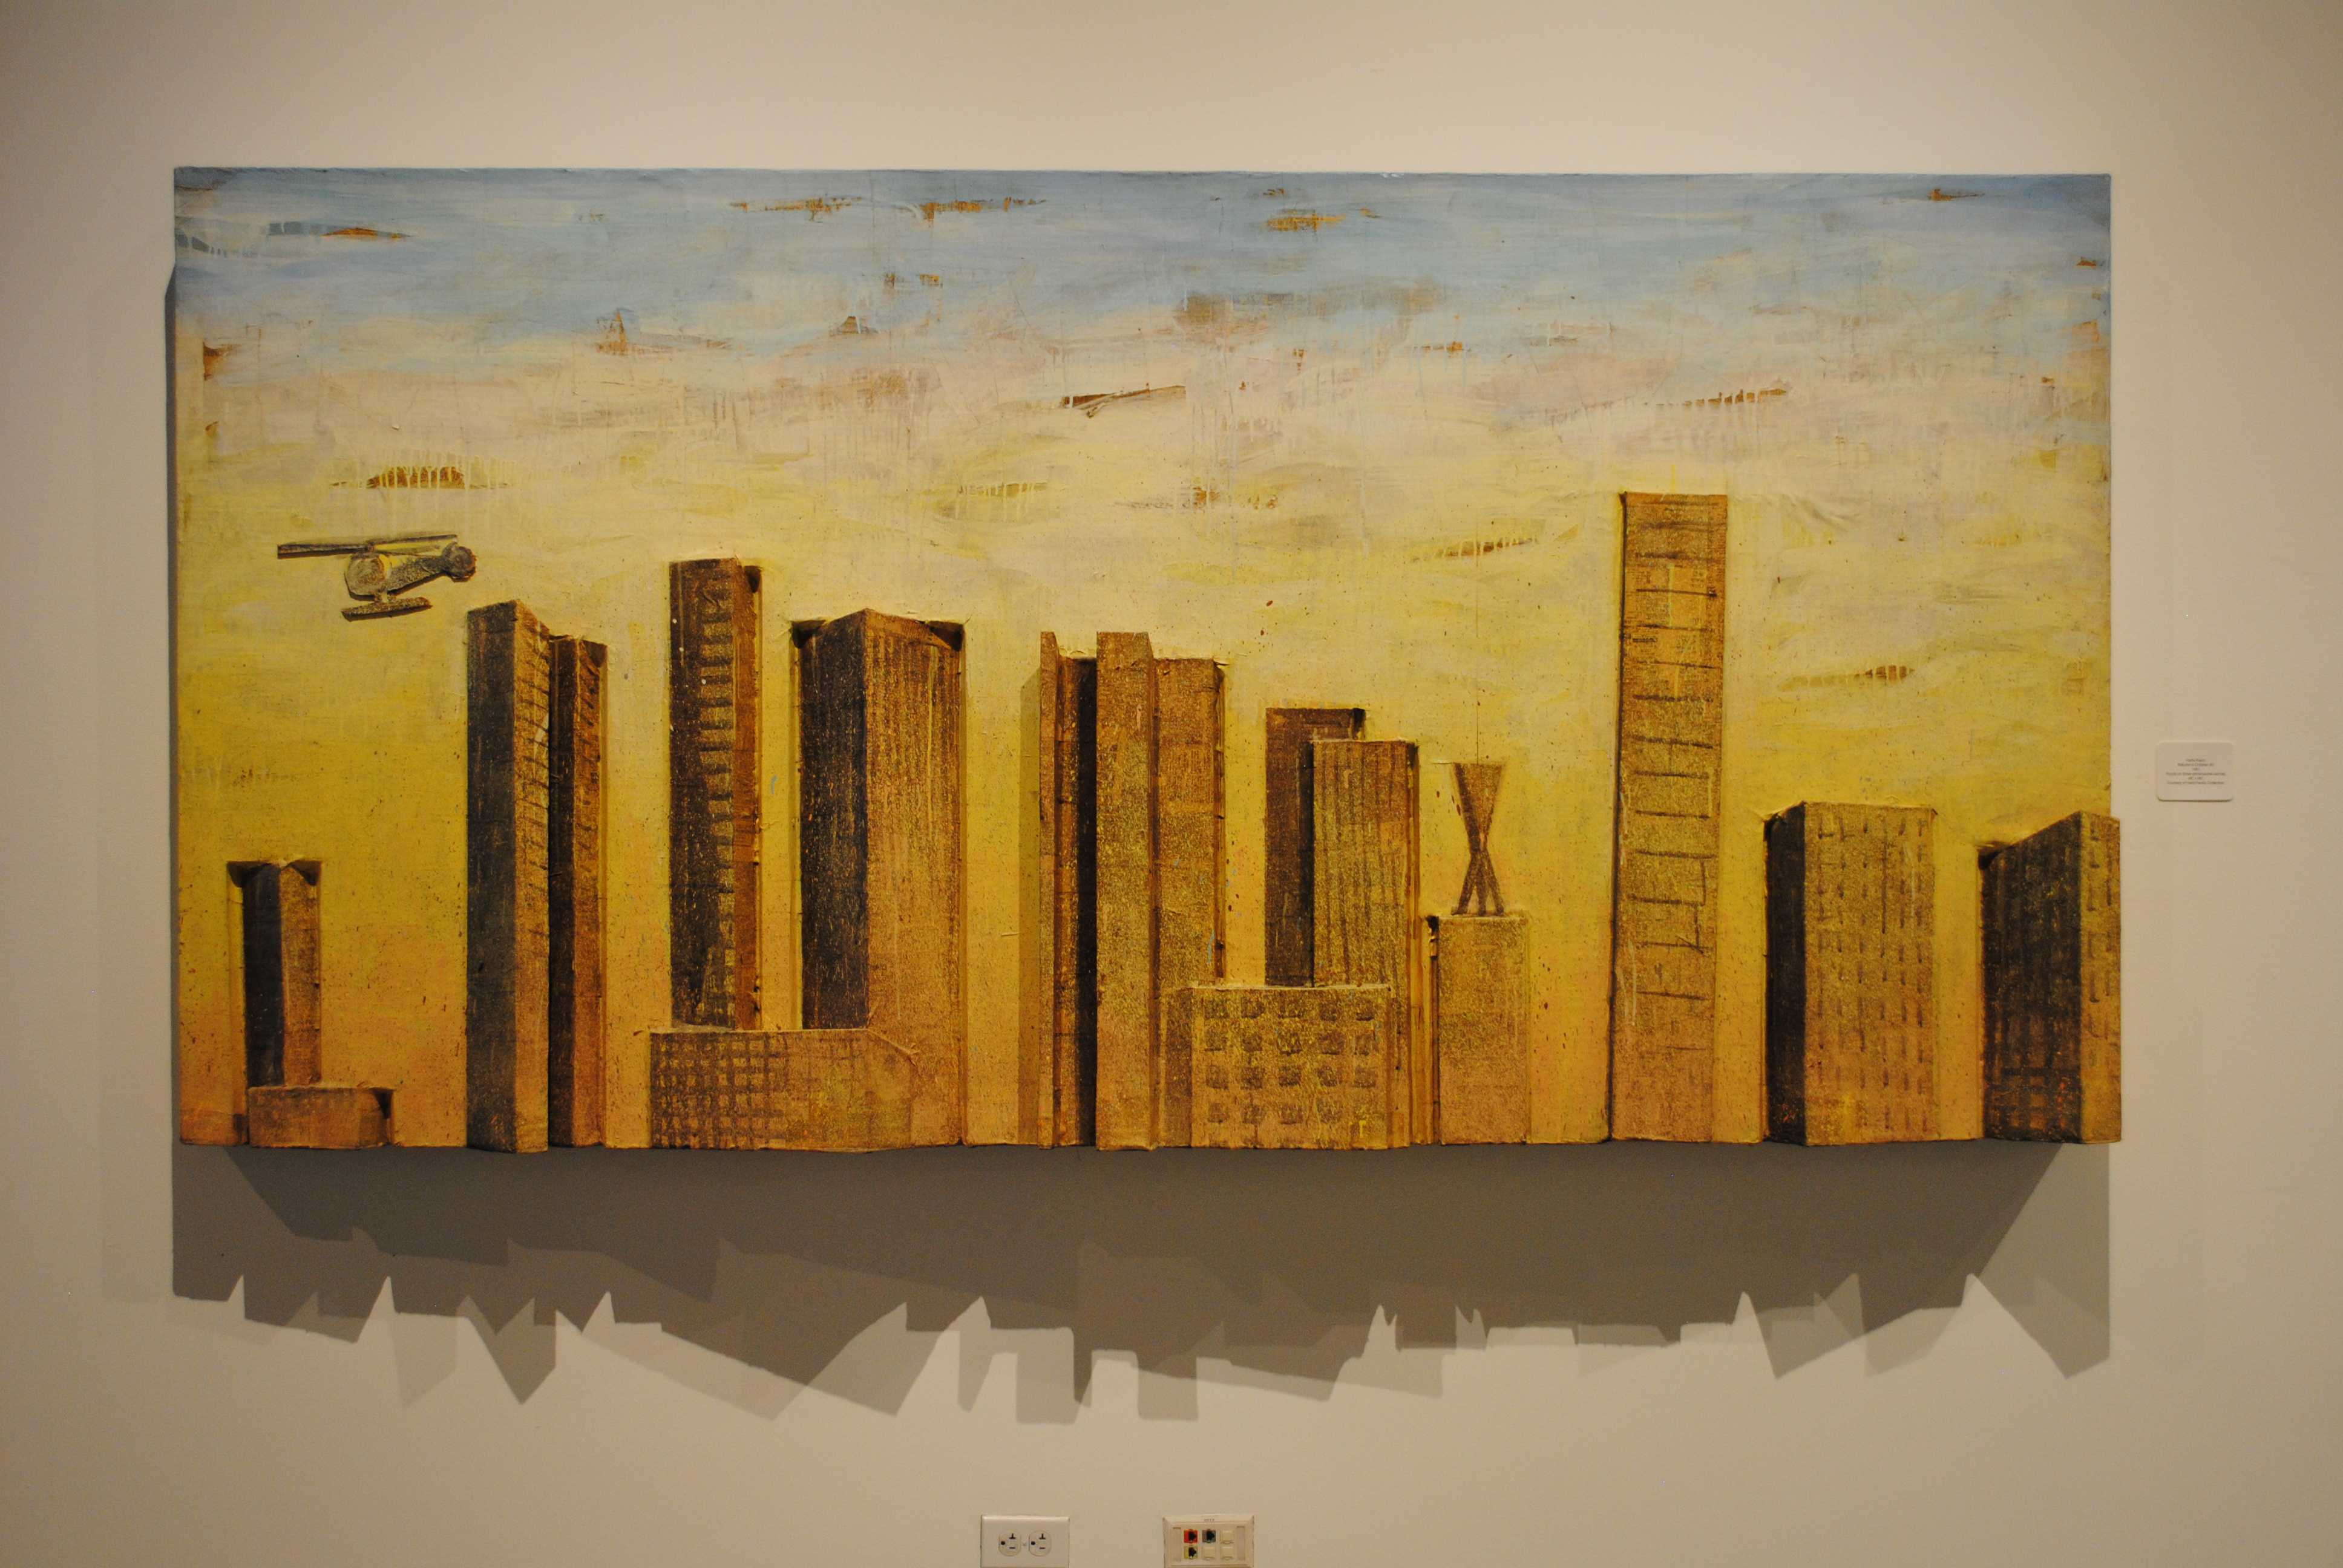 Acrylic painting shows a helicopter flying over buildings